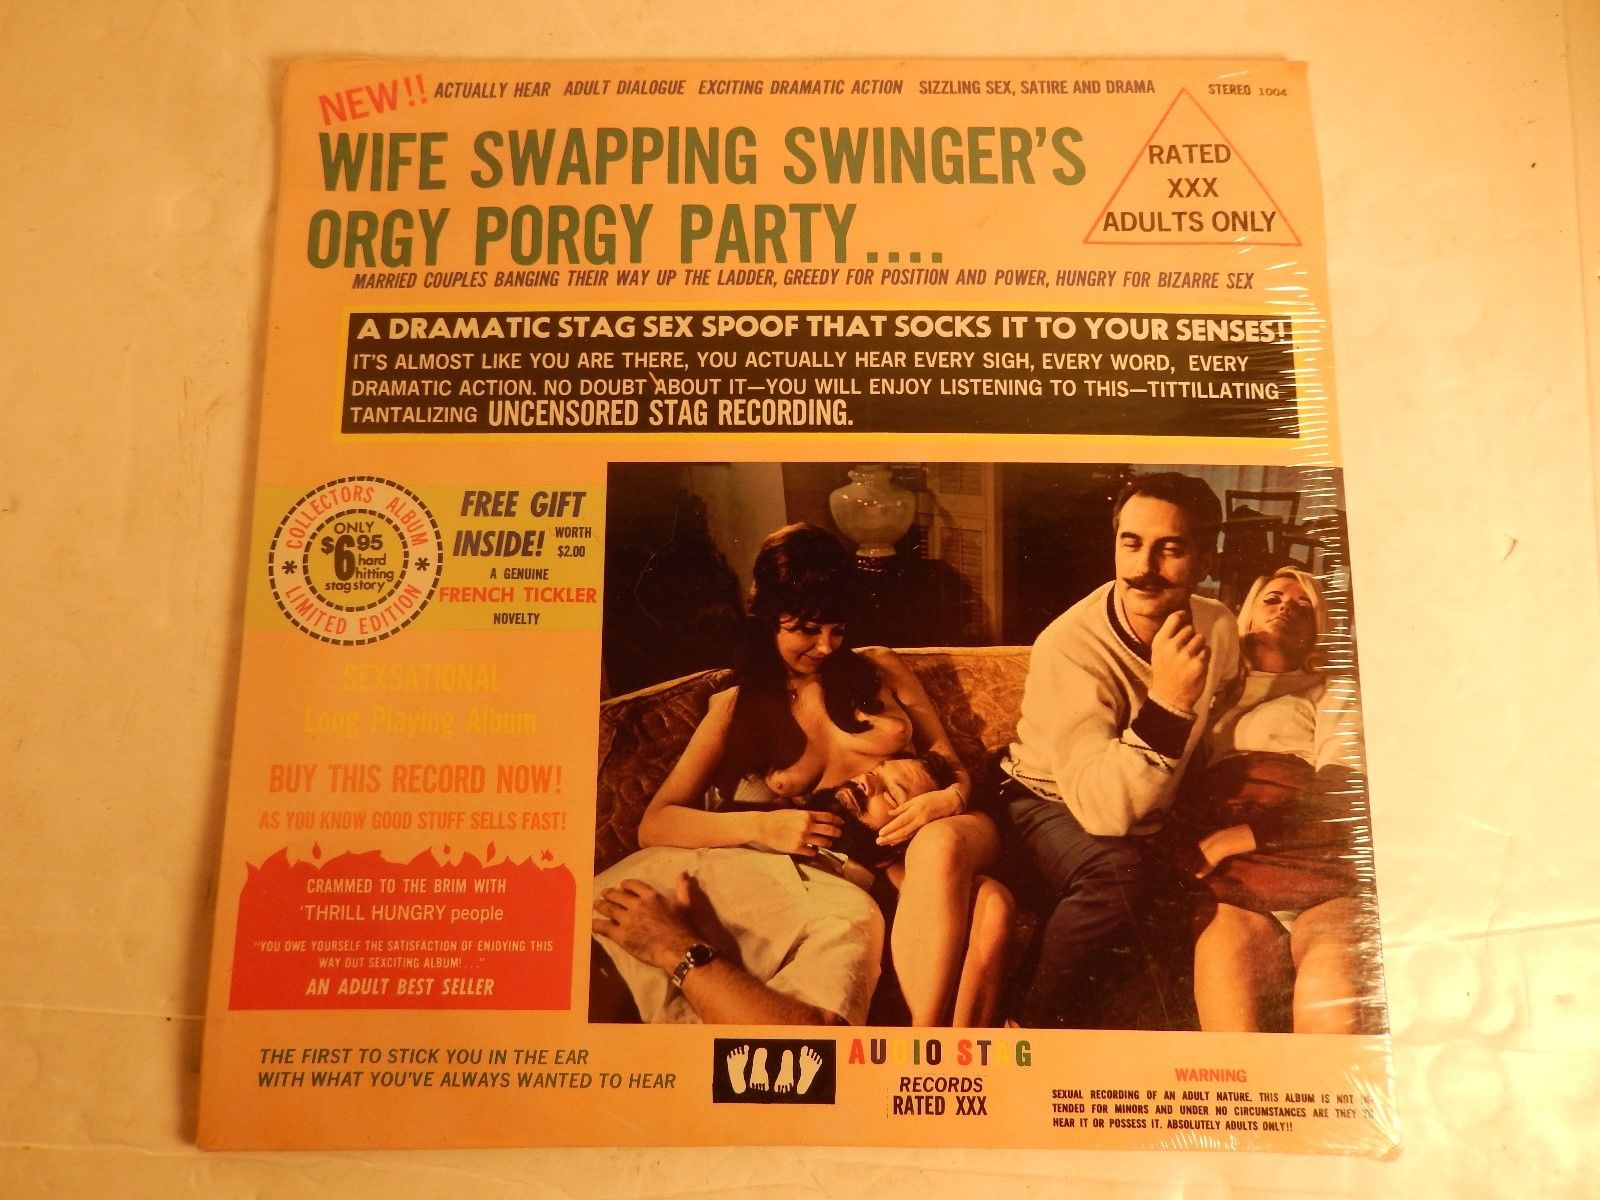 popsike - Vintage Sealed LP Audio Stag Records Adult XXX Wife Swapping Swingers Orgy Porgy picture photo